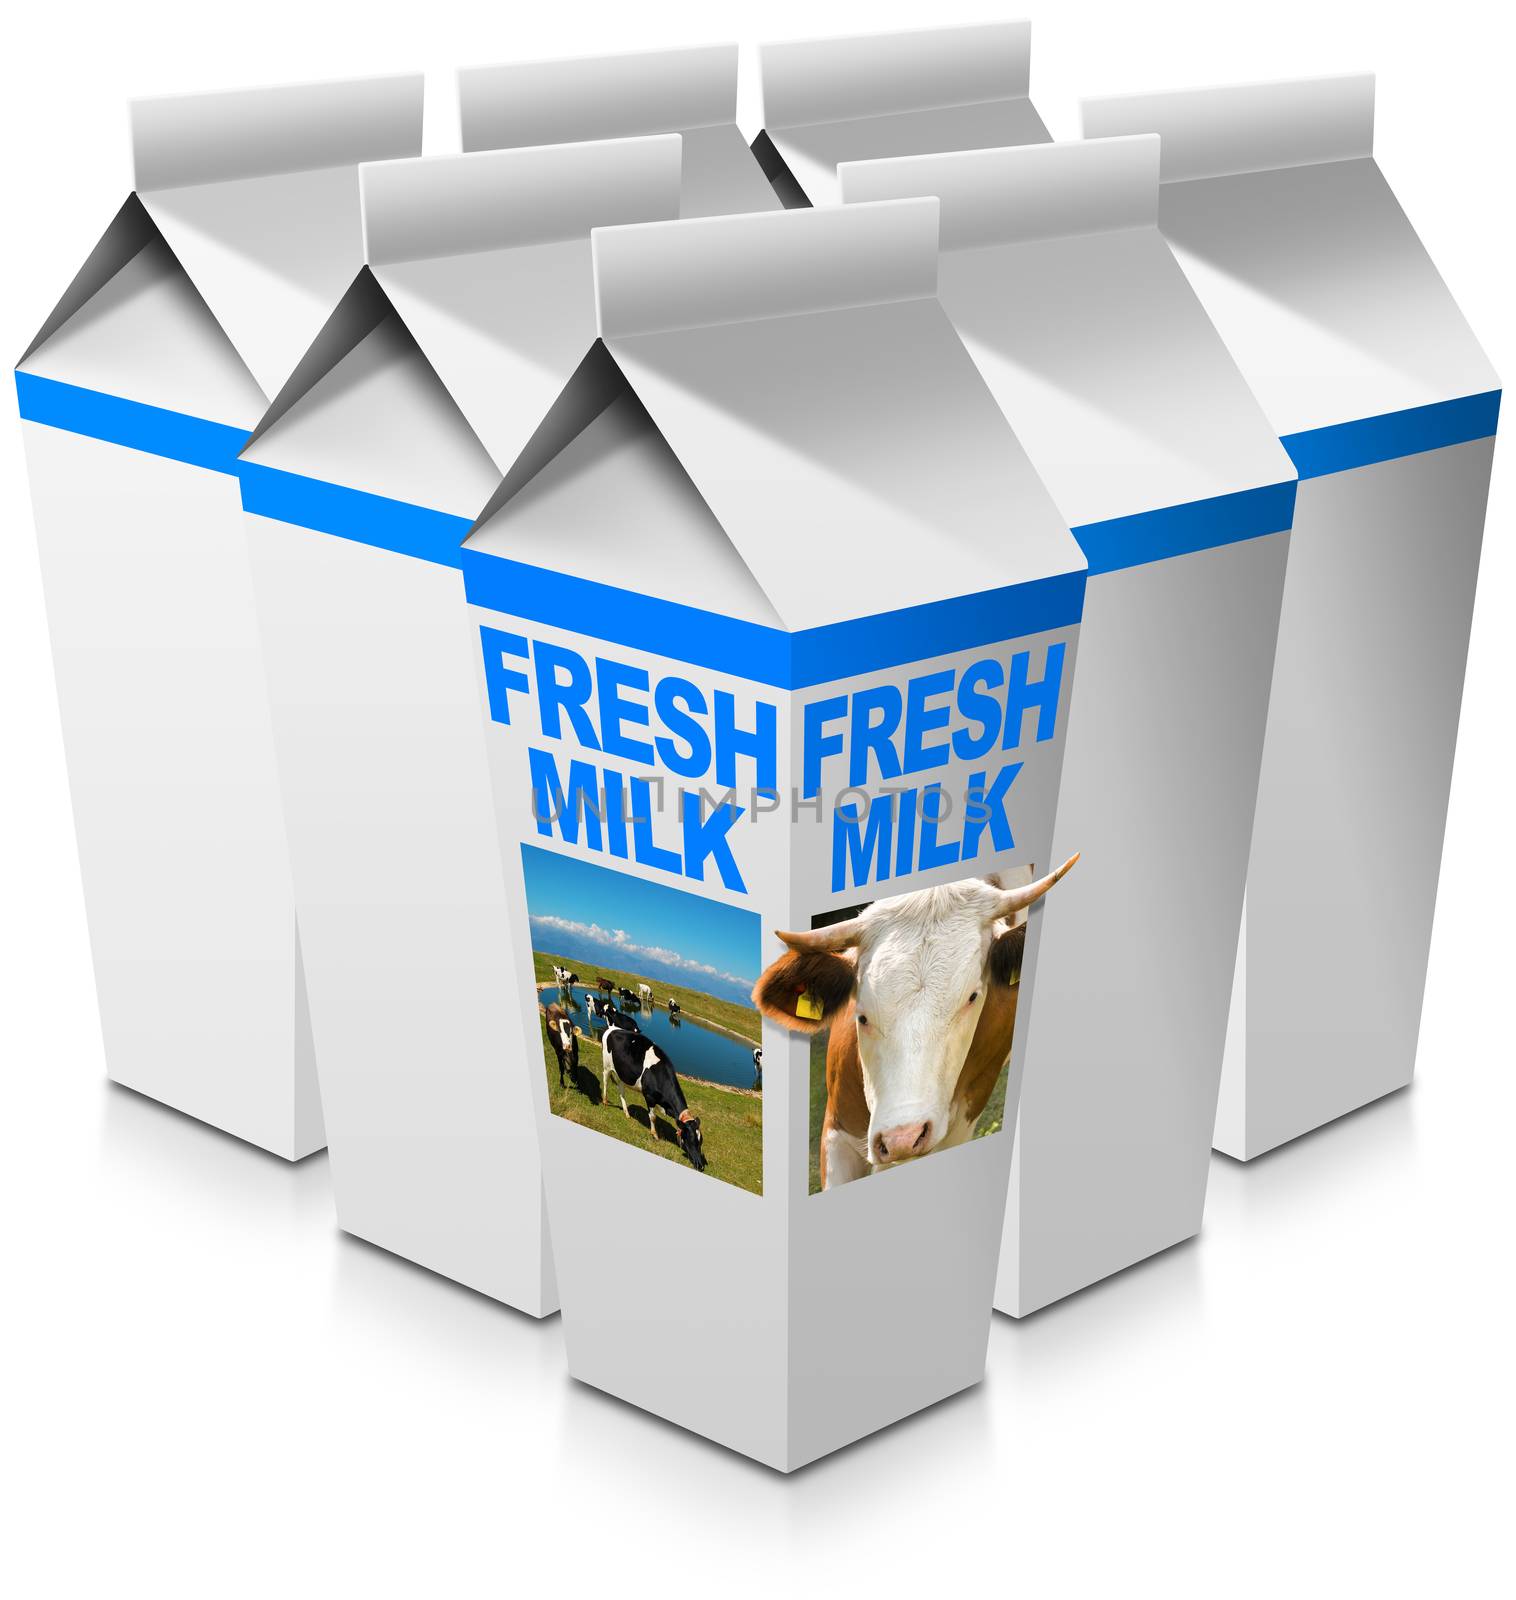 Group of milk packaging with text Fresh milk, head of cow with horns and a herd of spotted cows grazing. Isolated on white background